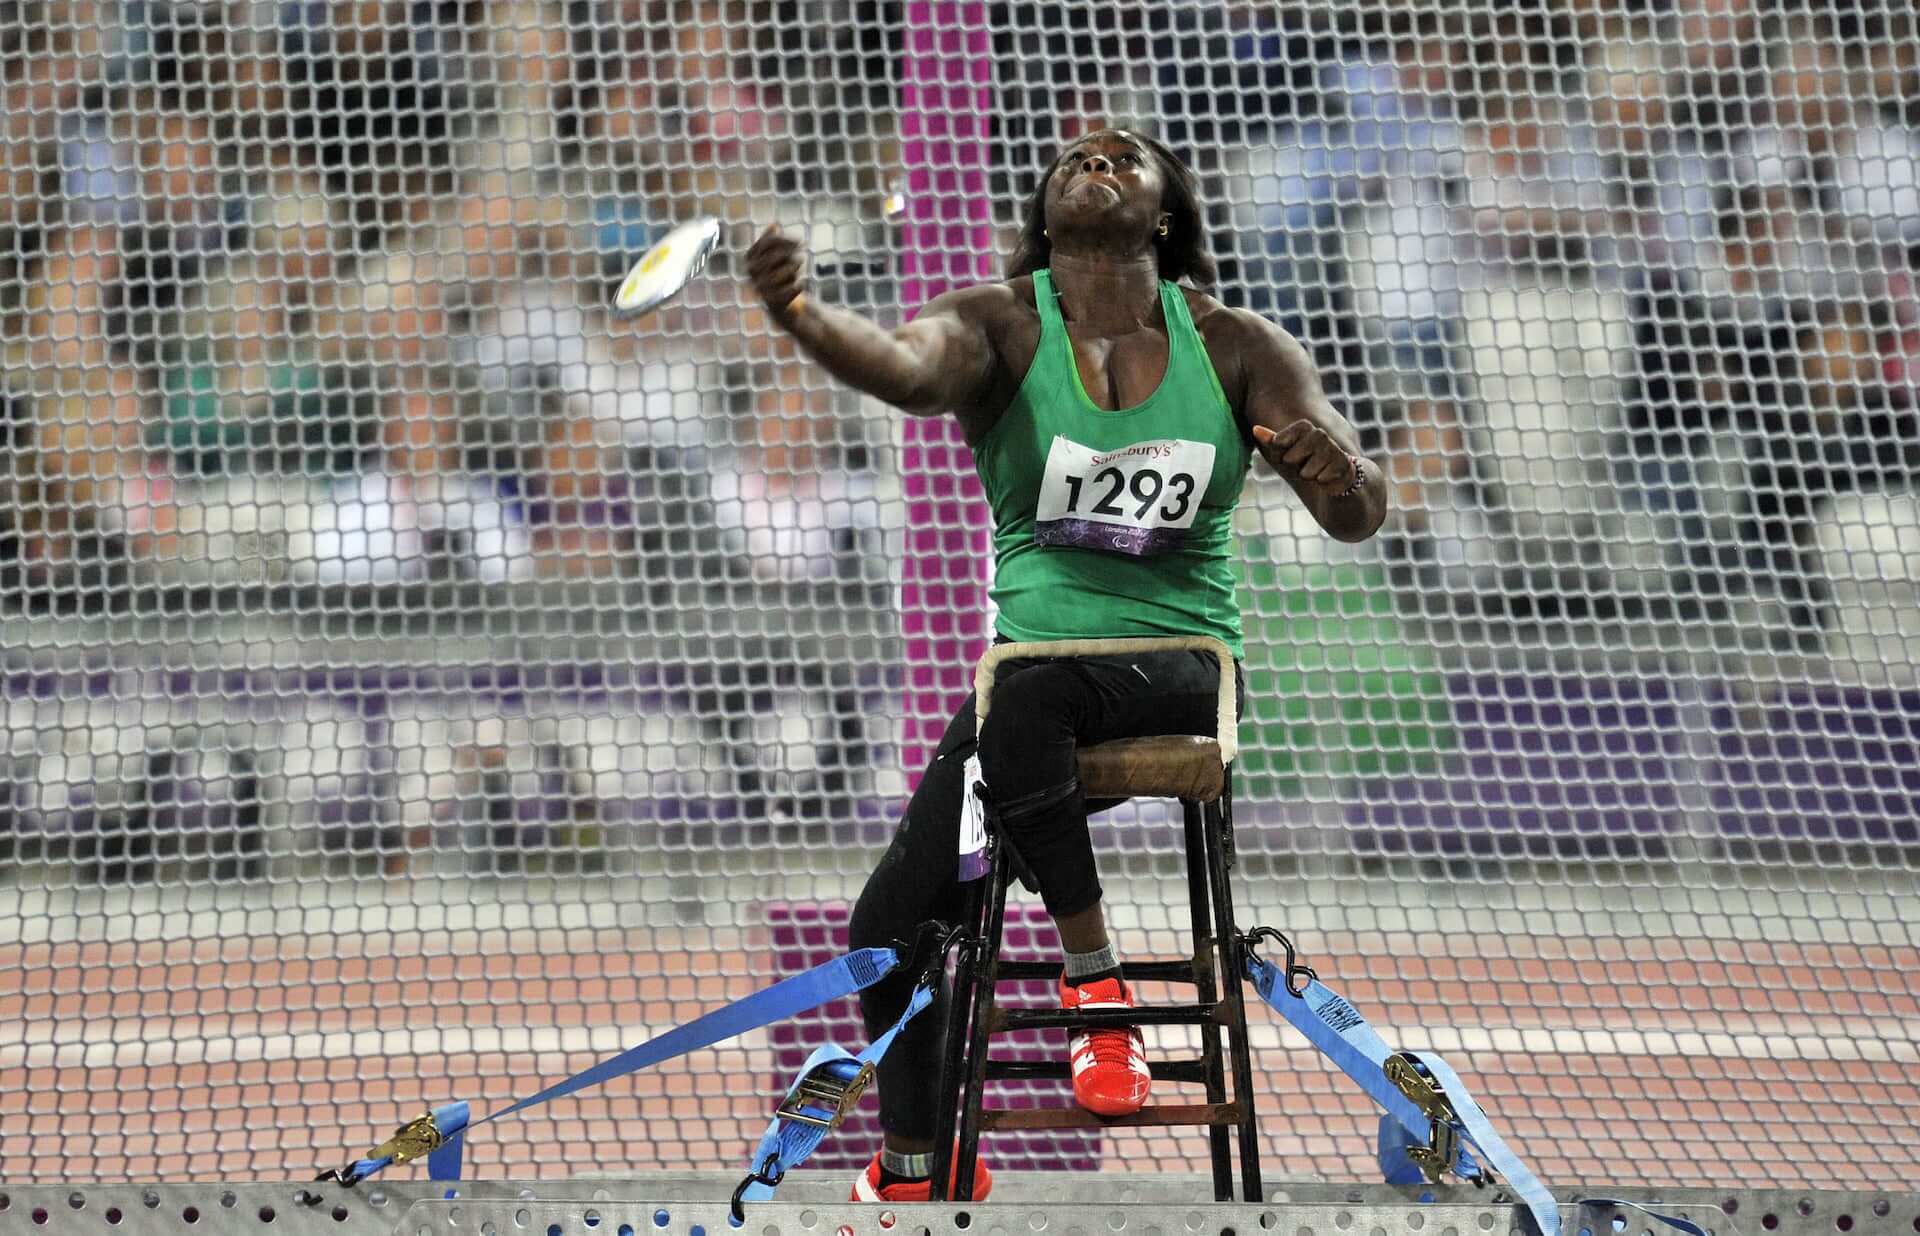 A Nigerian Paralympic discus athlete sits on a stool throwing a discus.